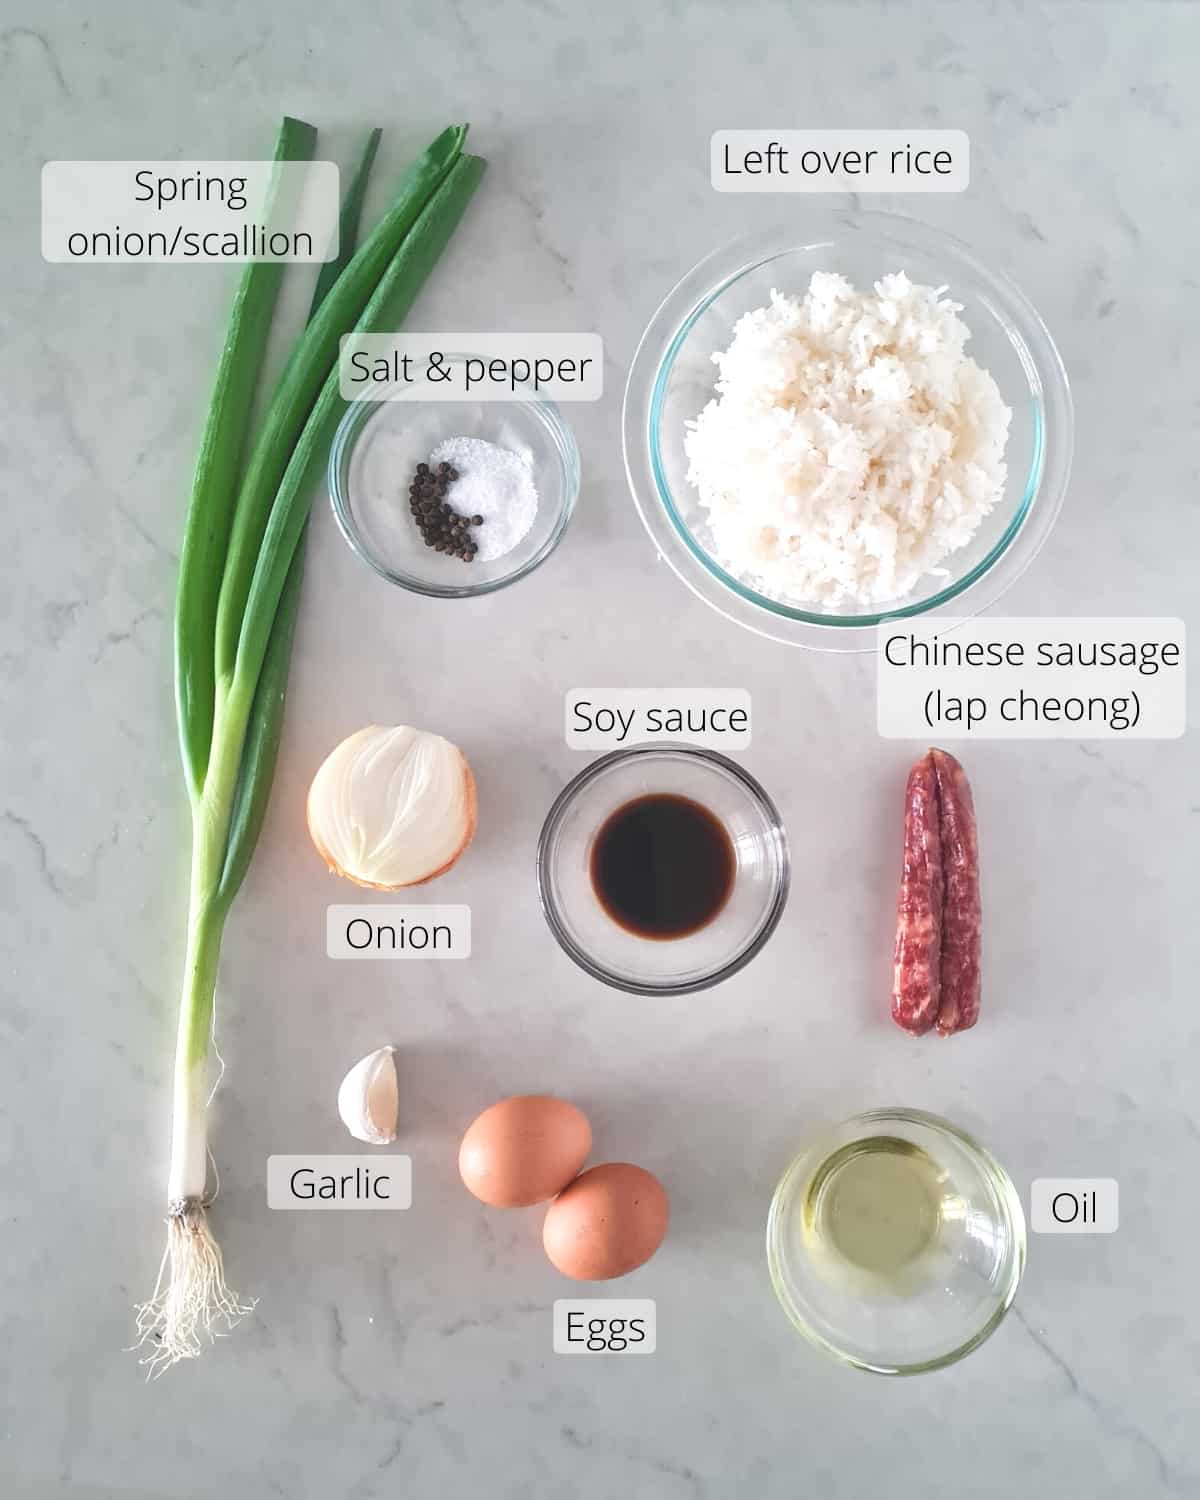 Overead shot of all the ingredients used in making this recipe